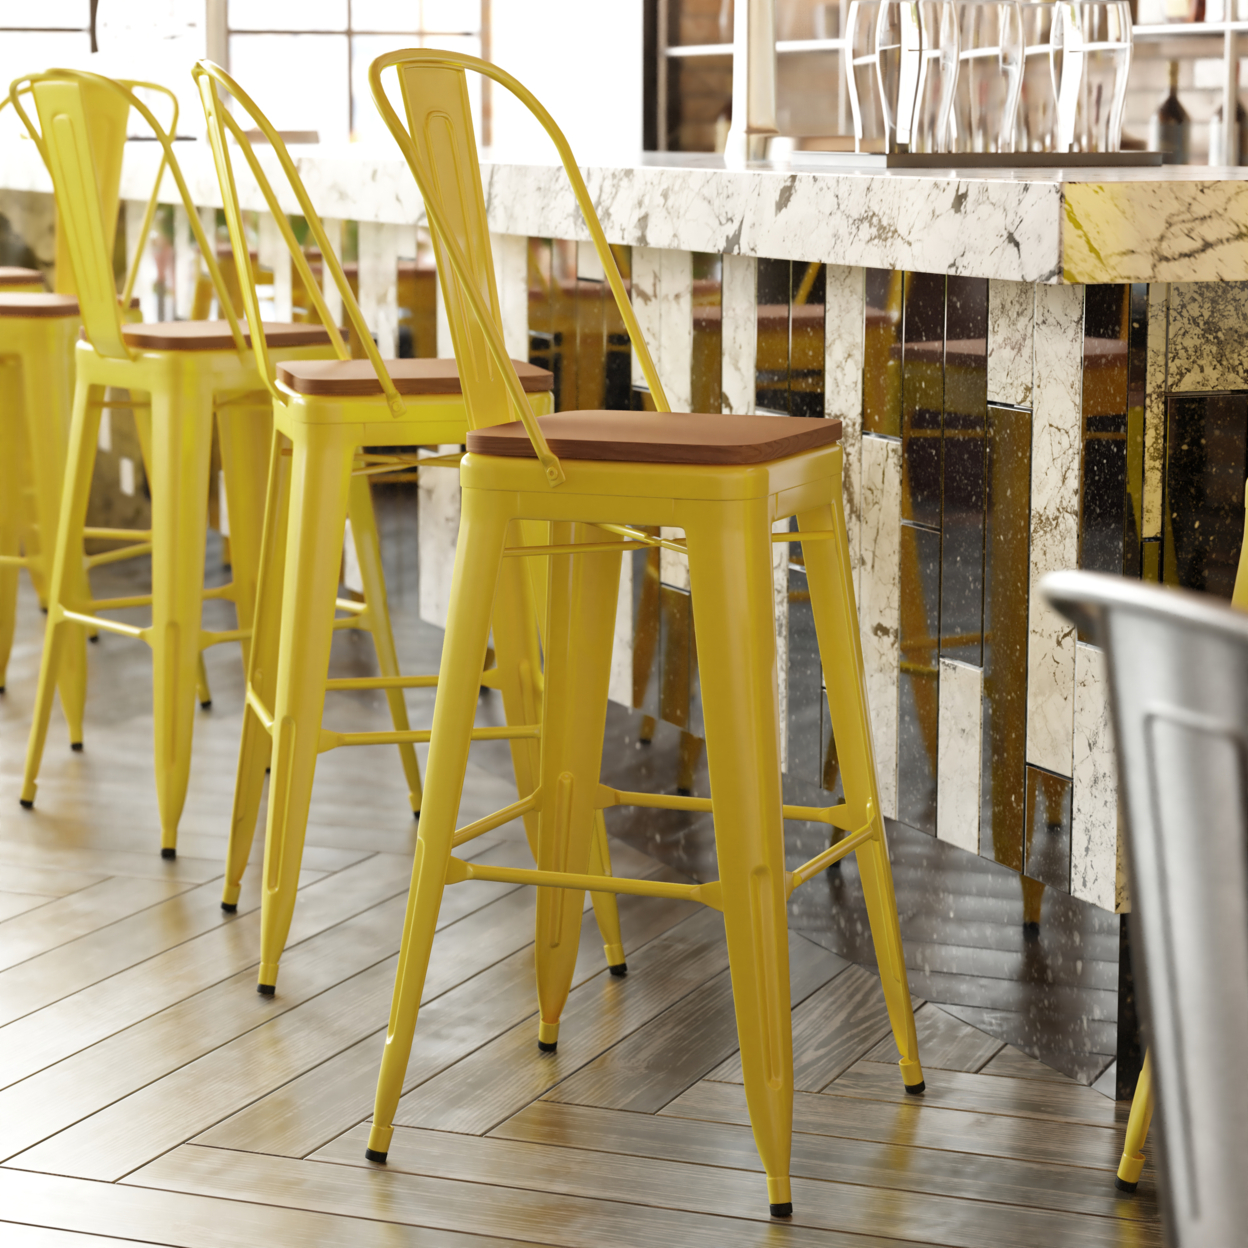 30 Inch Metal Chair, Curved Design Back, Polyresin Sleek Seat, Yellow